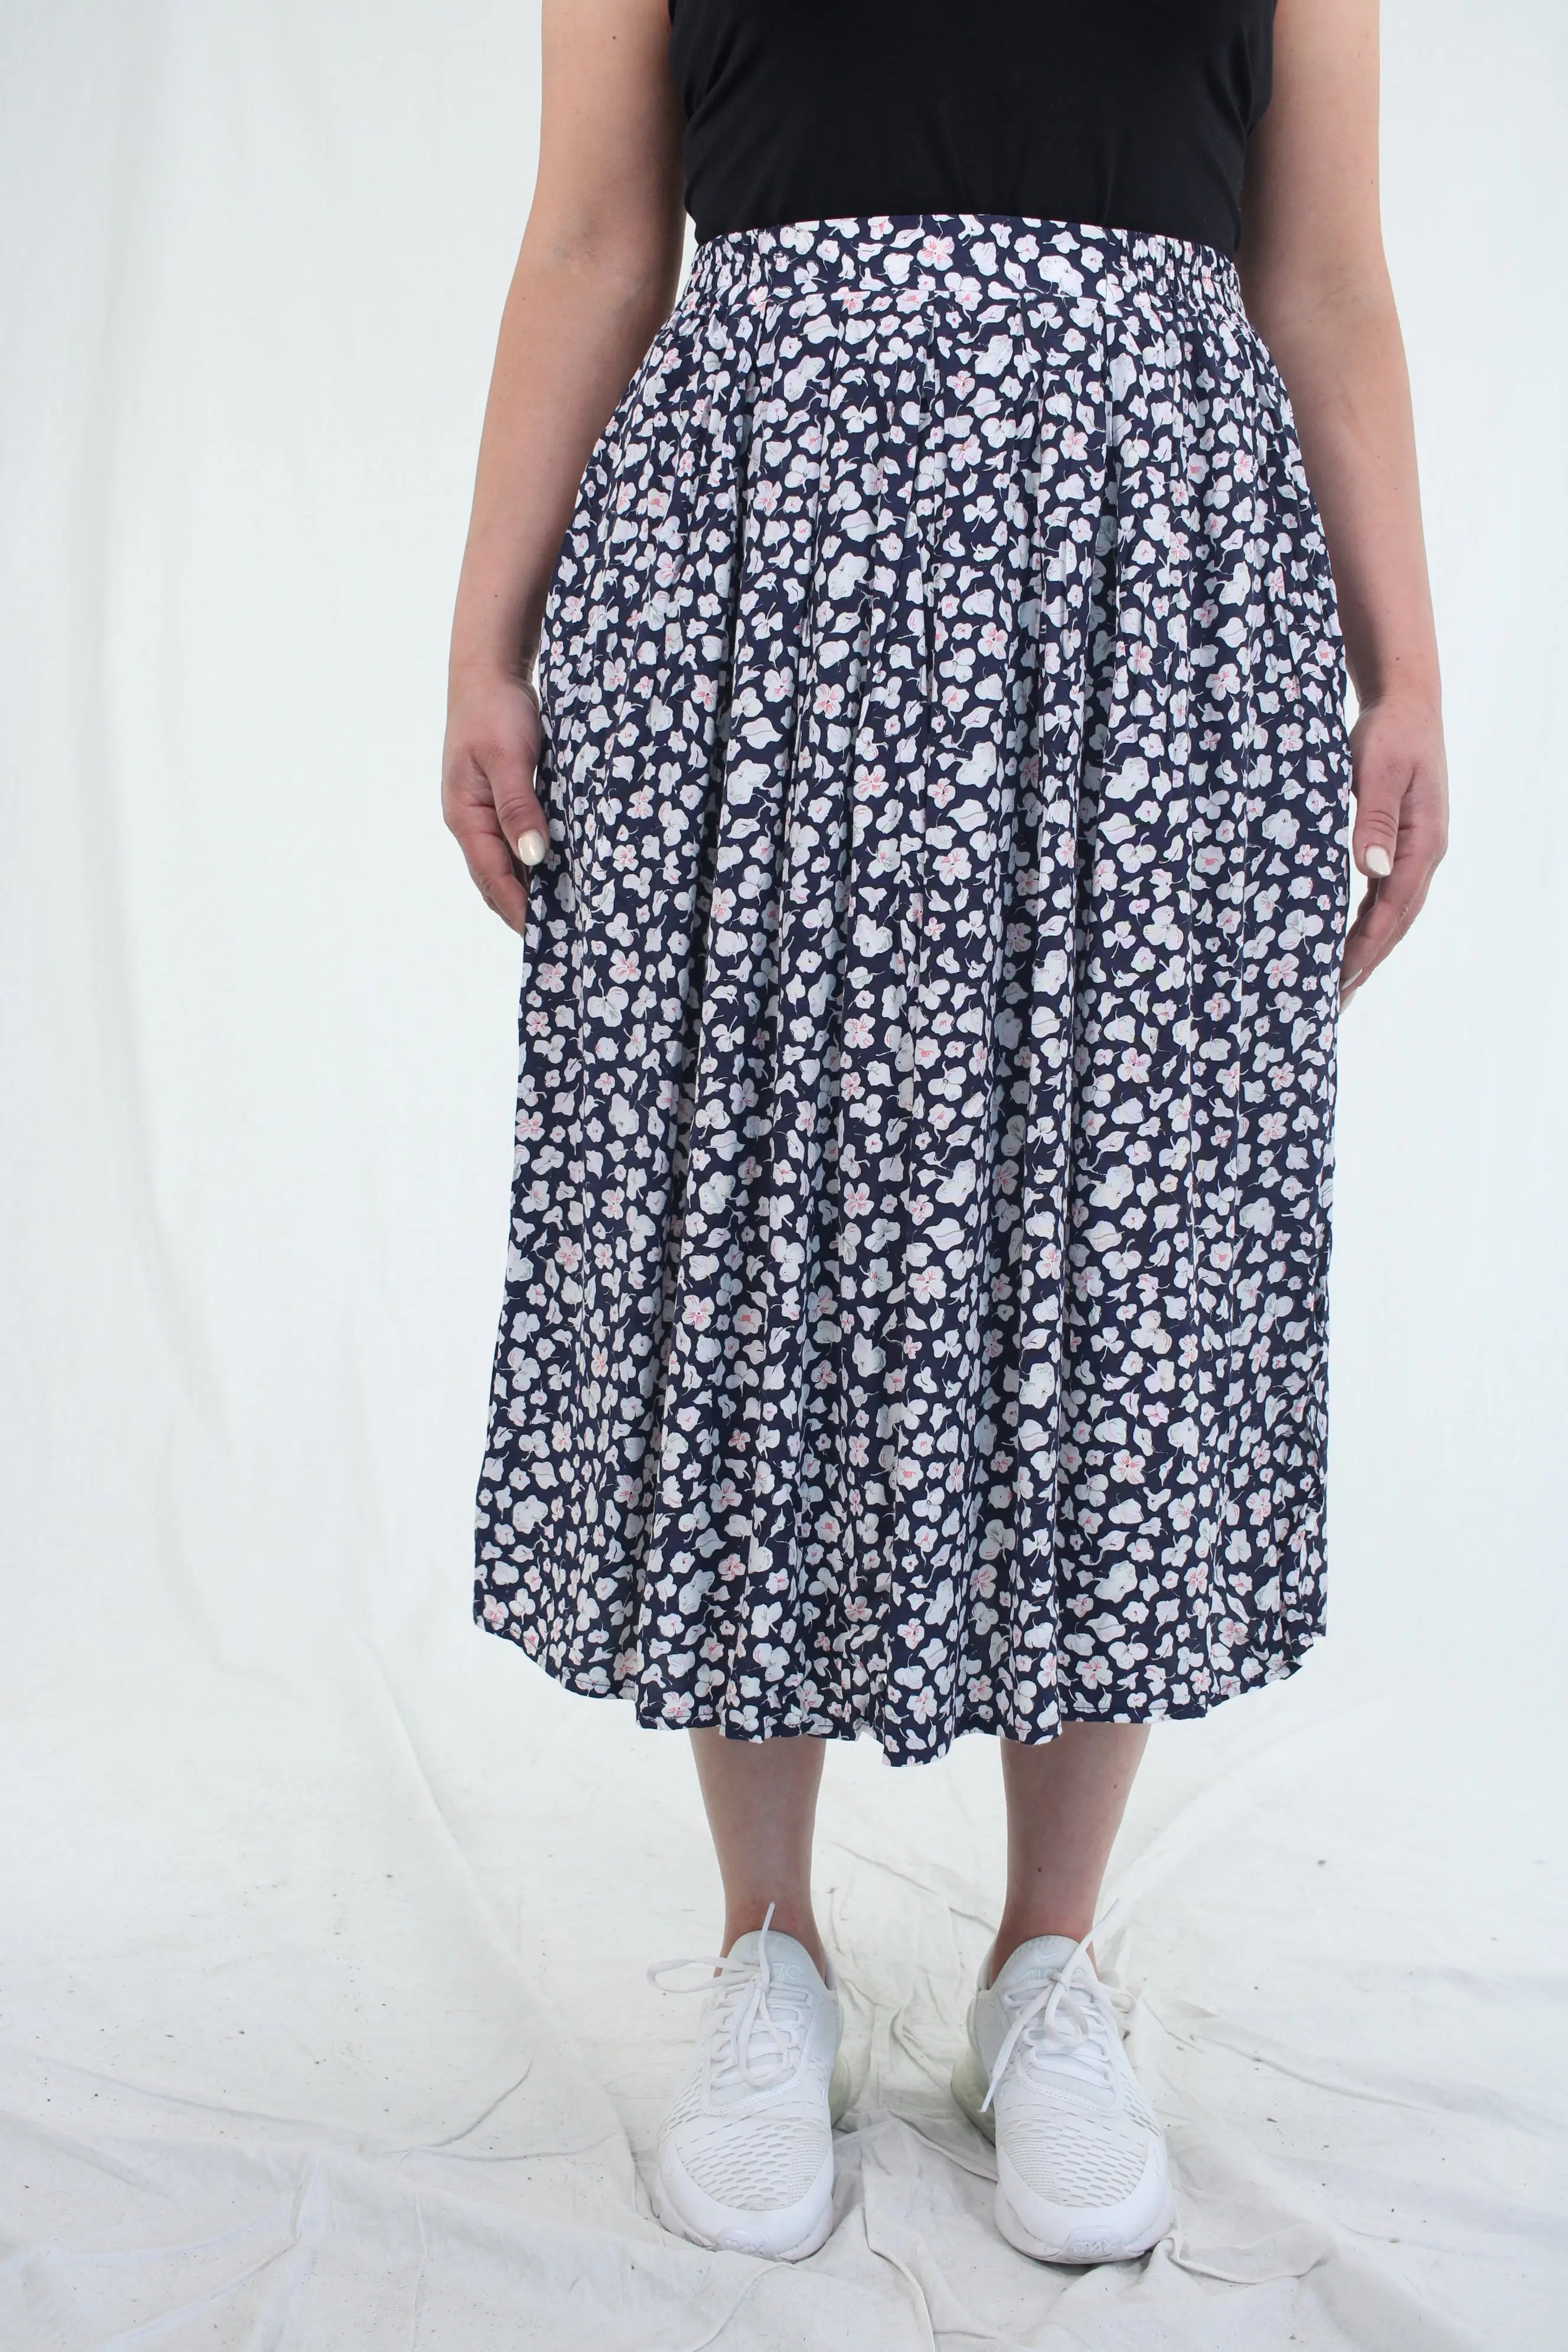 Unknown - Vintage Floral Skirt- ThriftTale.com - Vintage and second handclothing